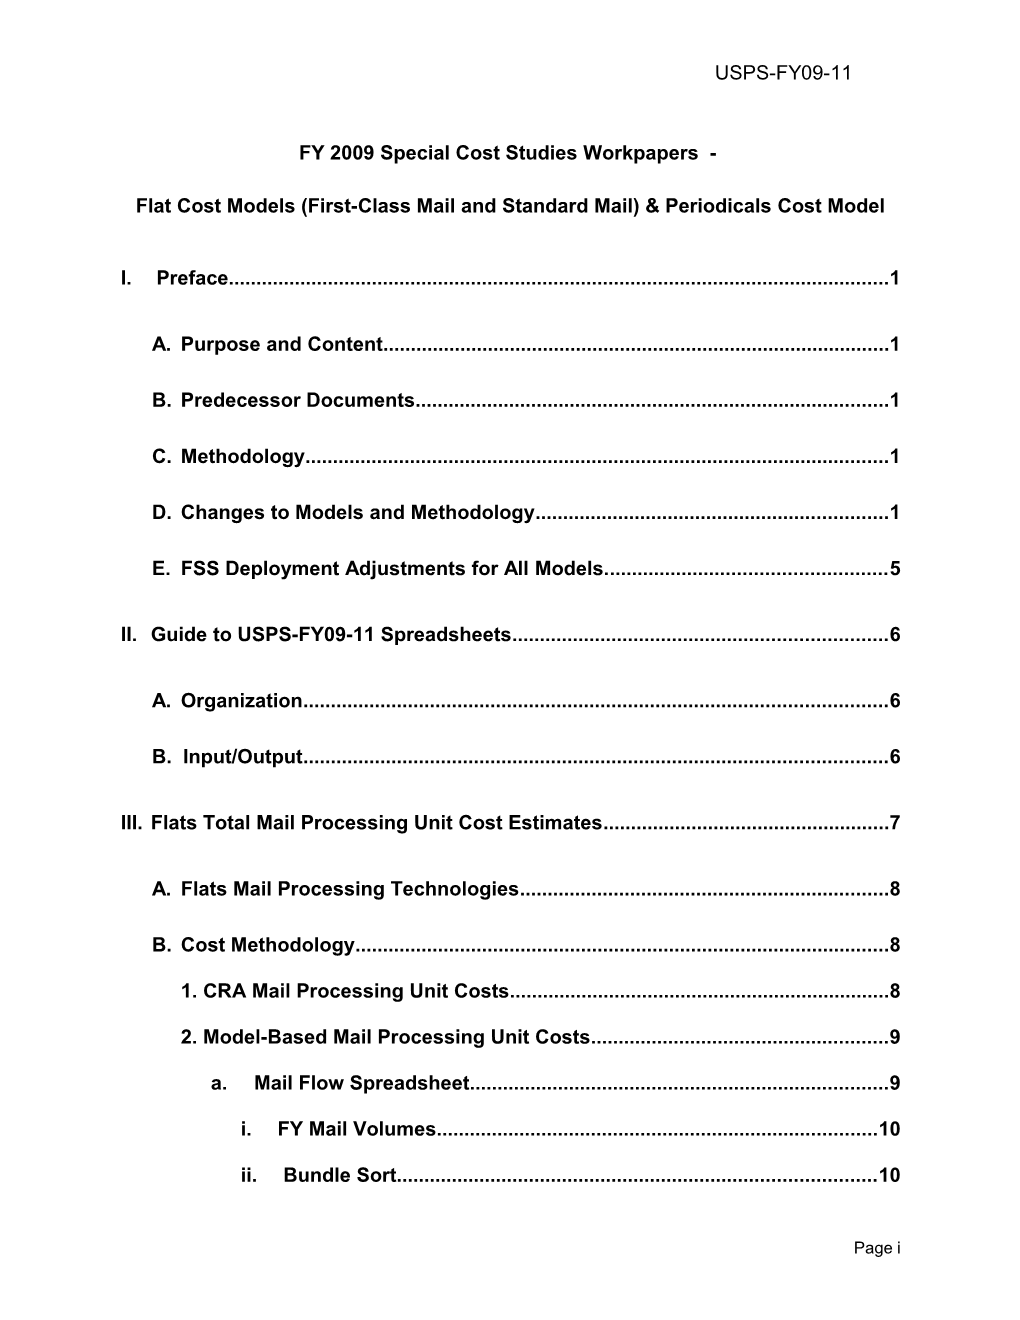 FY 2009 Special Cost Studies Workpapers